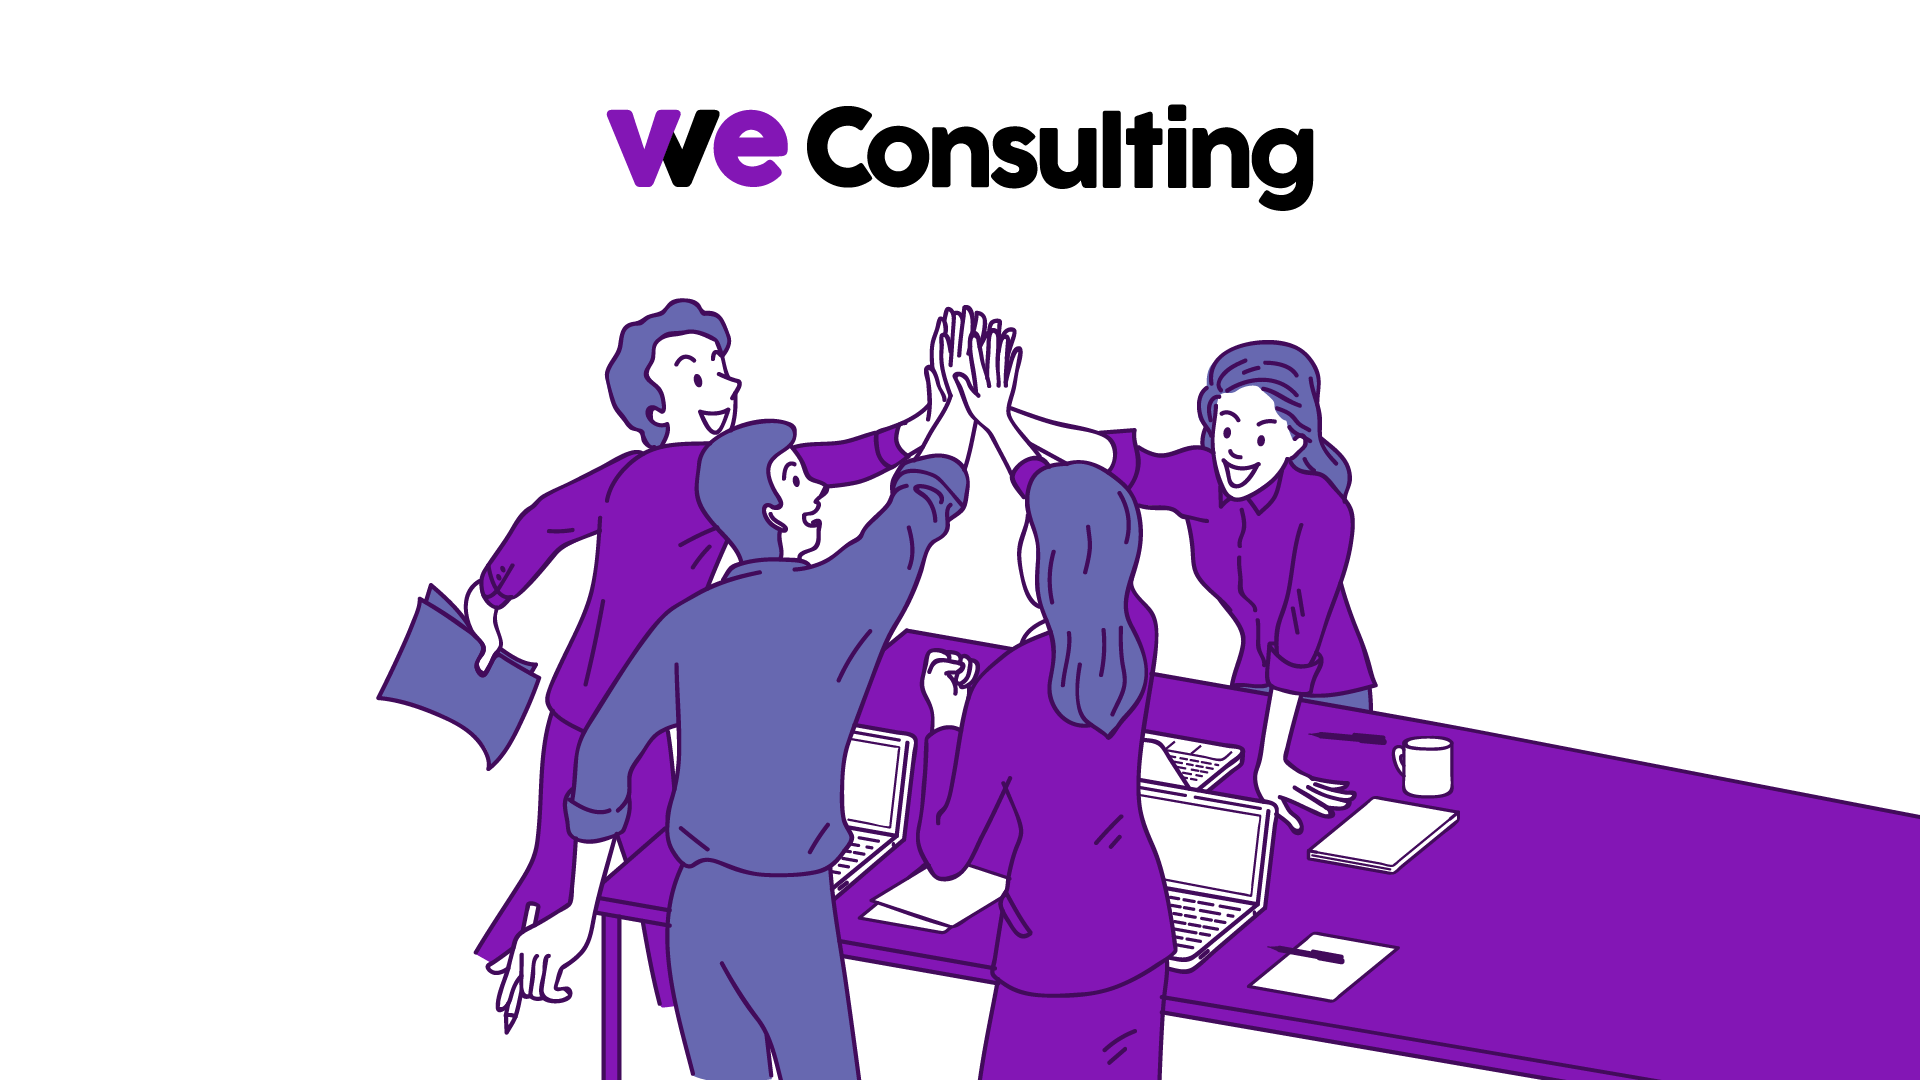 WeConsulting